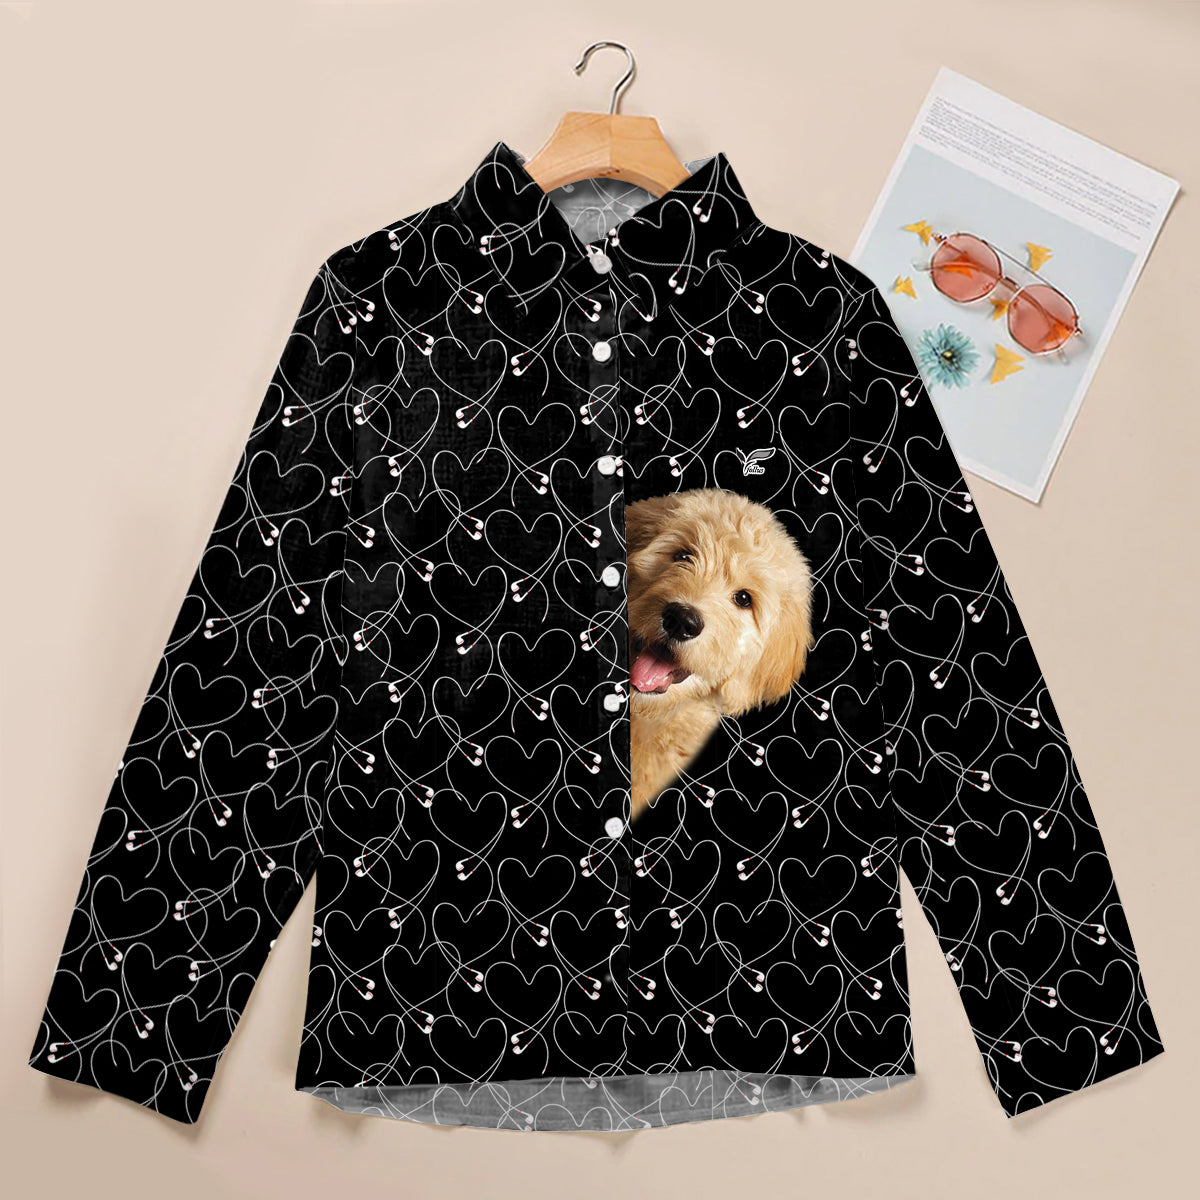 Goldendoodle Will Steal Your Heart - Follus Women's Long-Sleeve Shirt